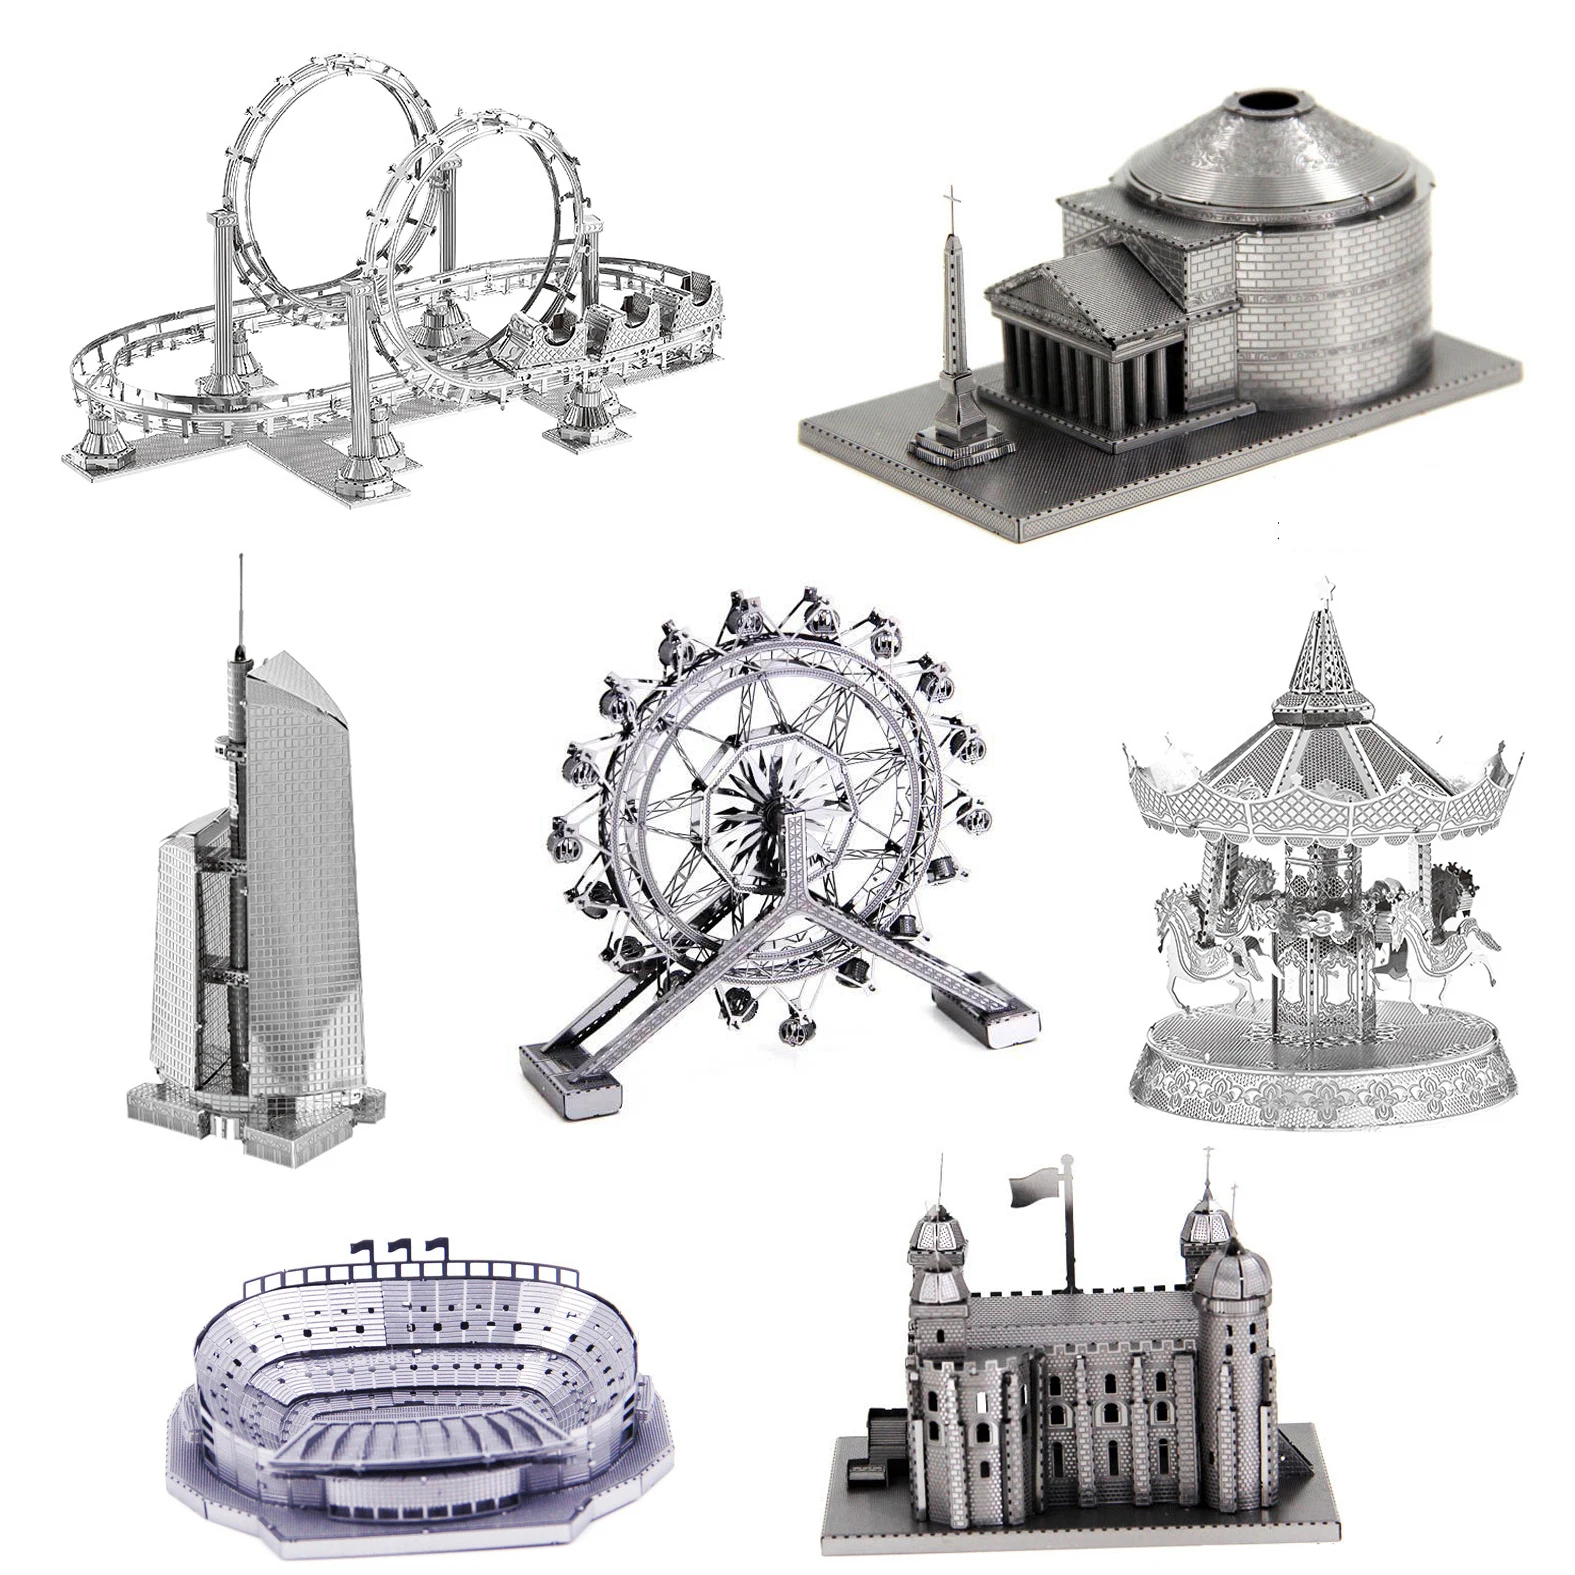 

3D Metal Puzzle Playground building Tower Bridge Cable car model KITS Assemble Jigsaw Puzzle Gift Toys For Children